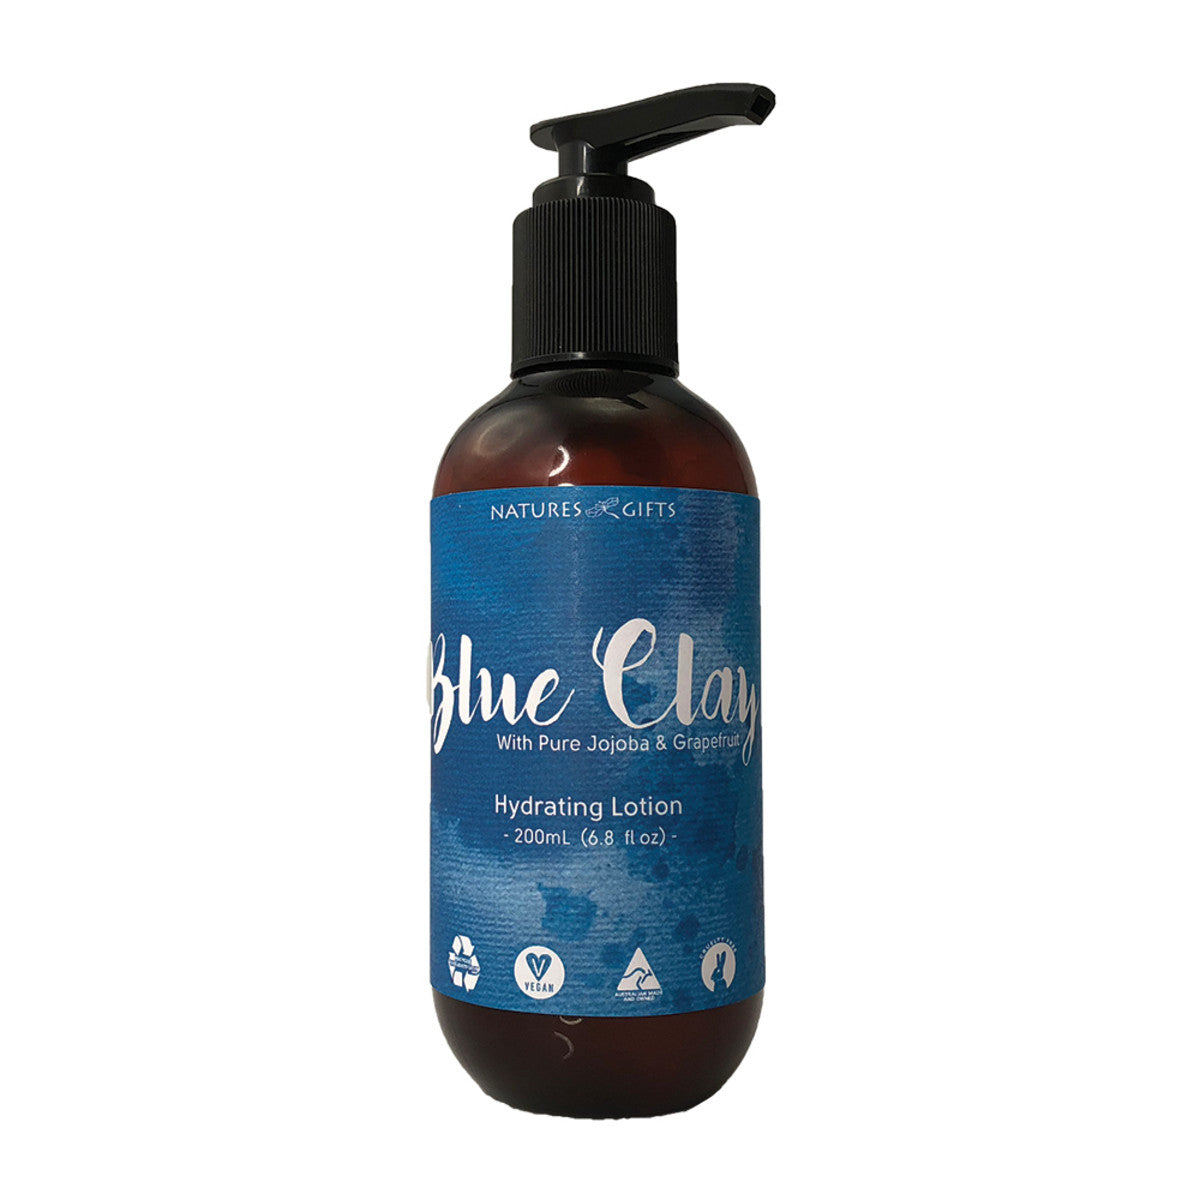 Clover Fields - N. Gifts Blue Clay Hydrating Lotion